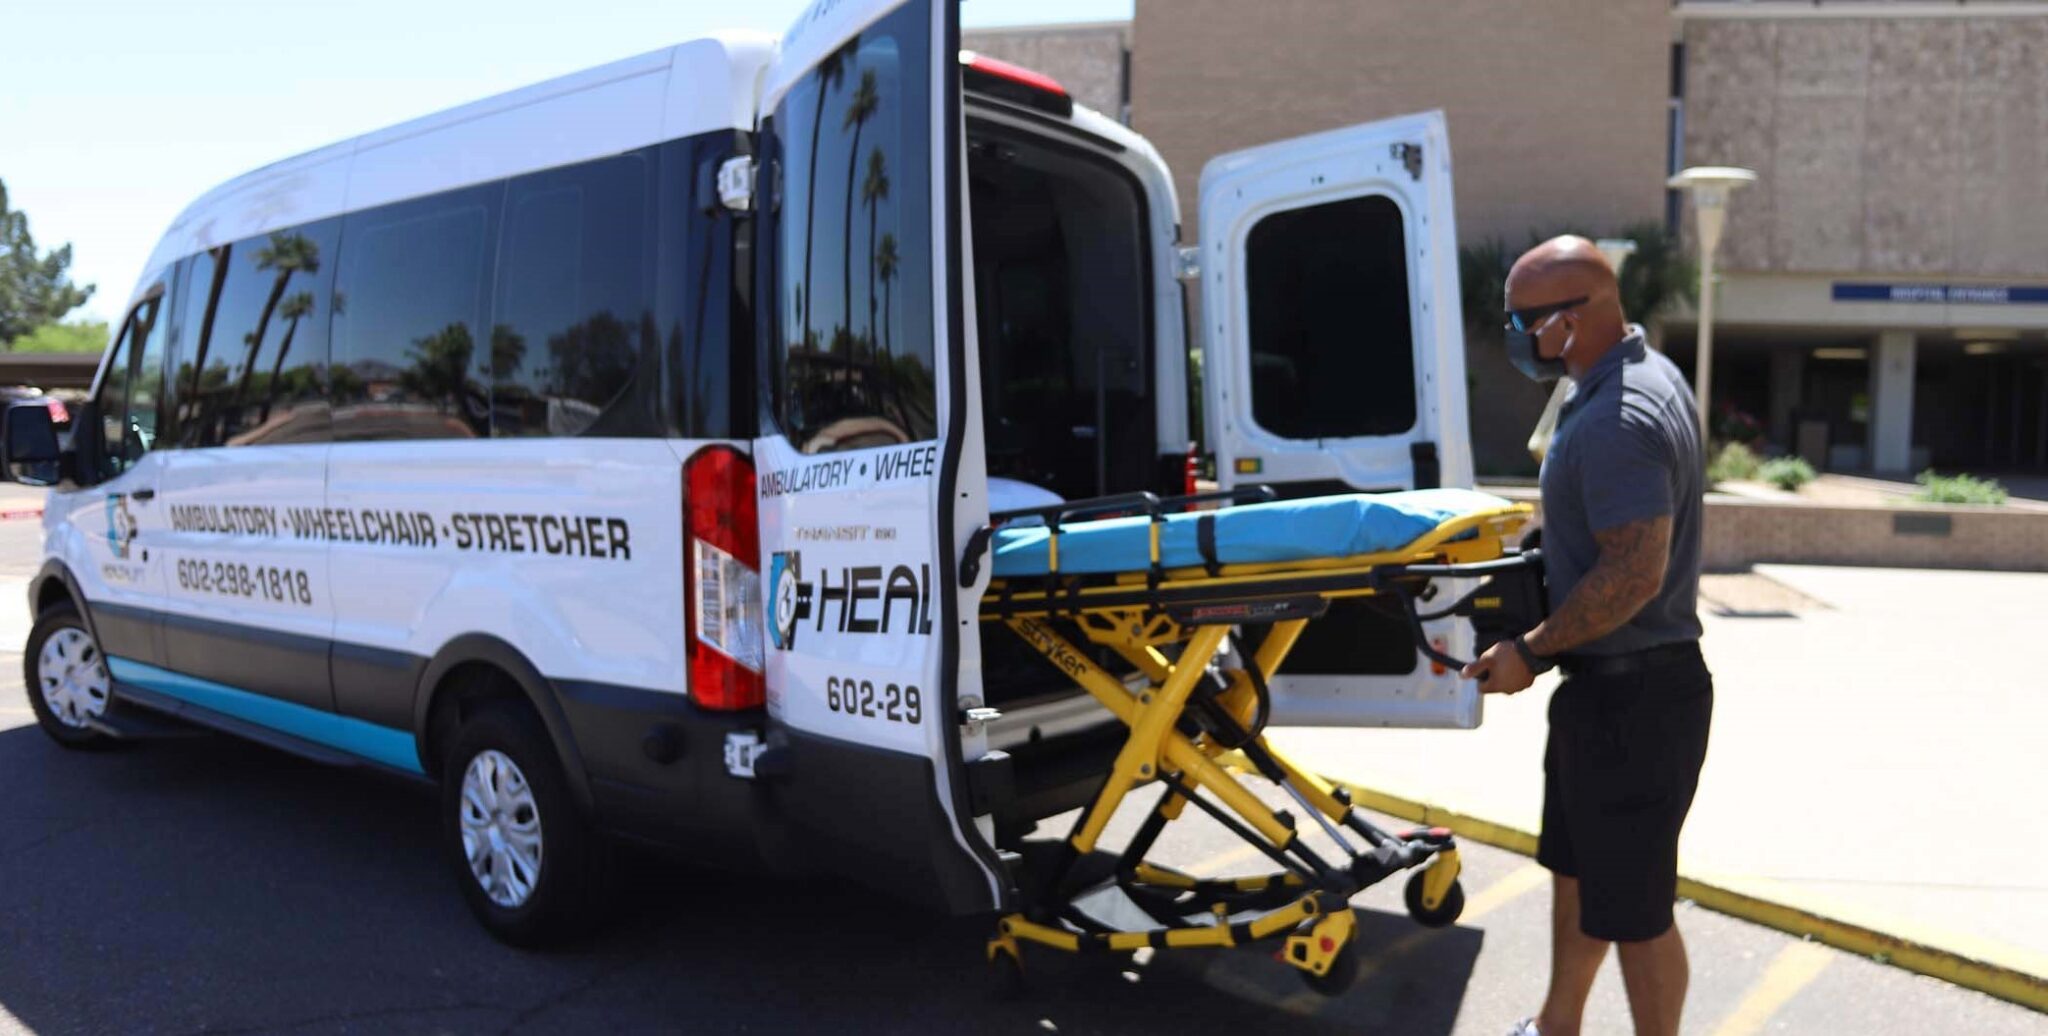 What To Expect During NonEmergency Patient Transport